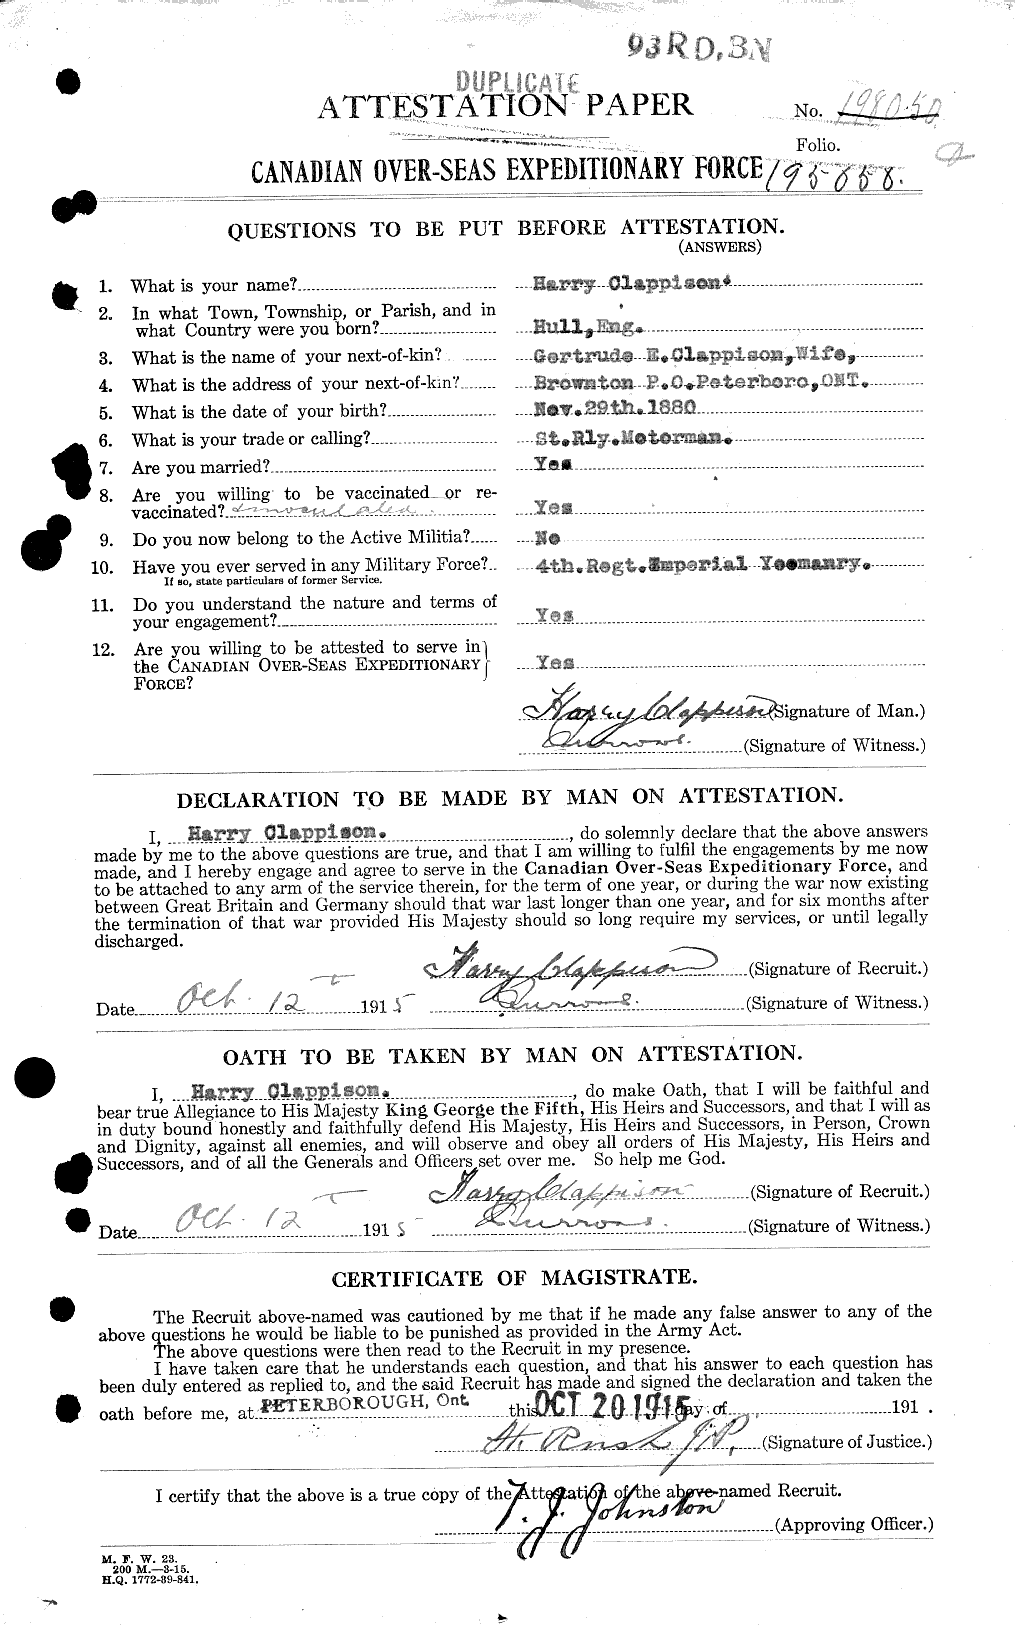 Personnel Records of the First World War - CEF 020624a